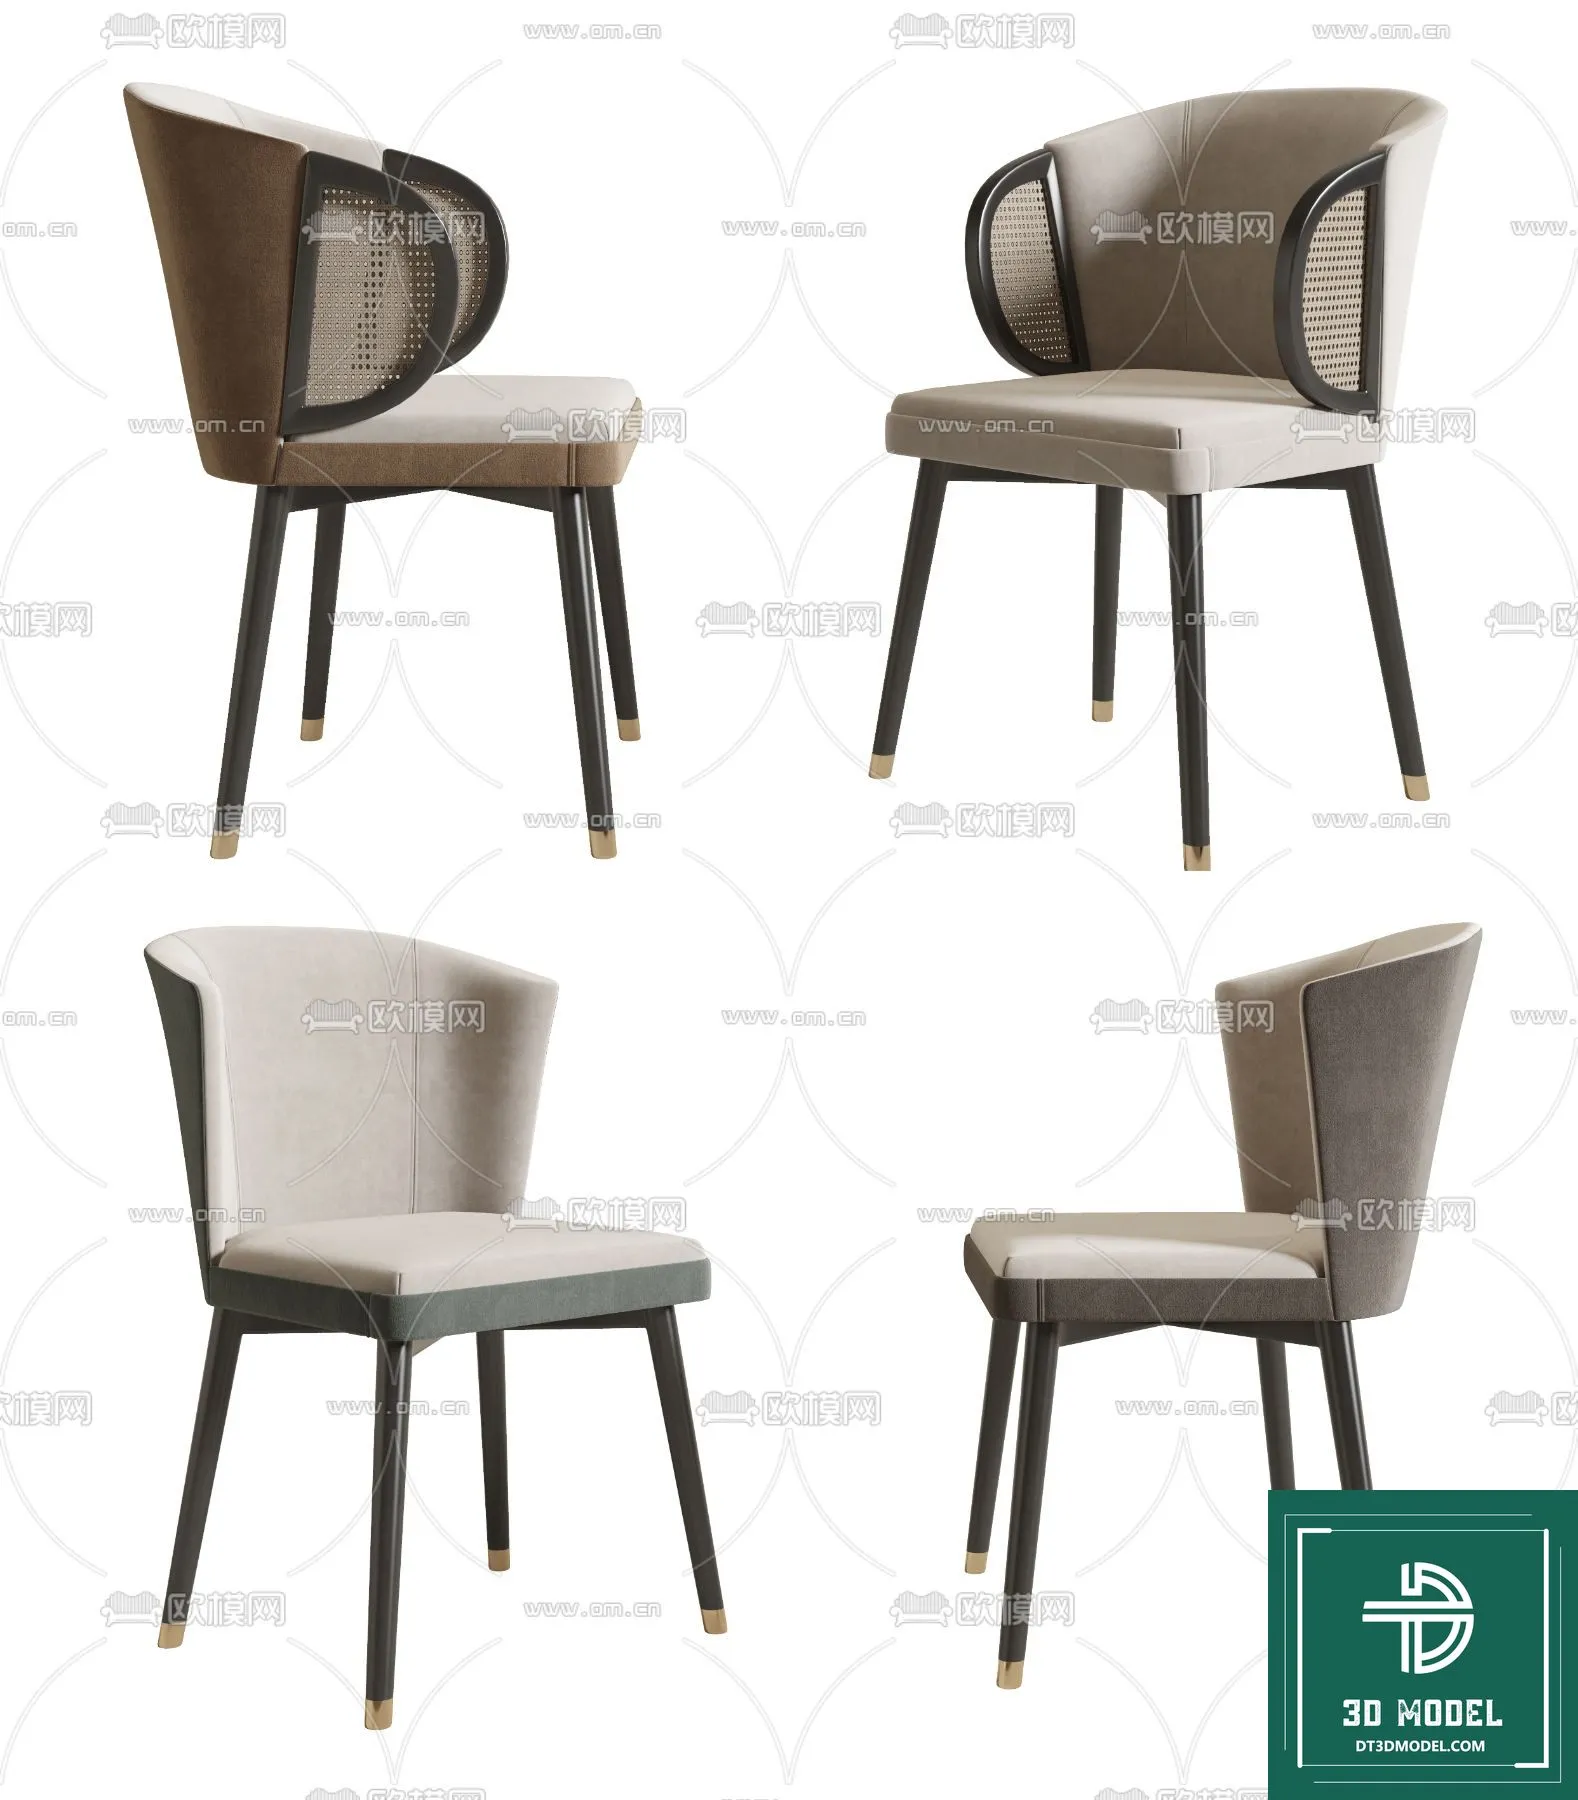 INDOCHINE STYLE – 3D MODELS – 574